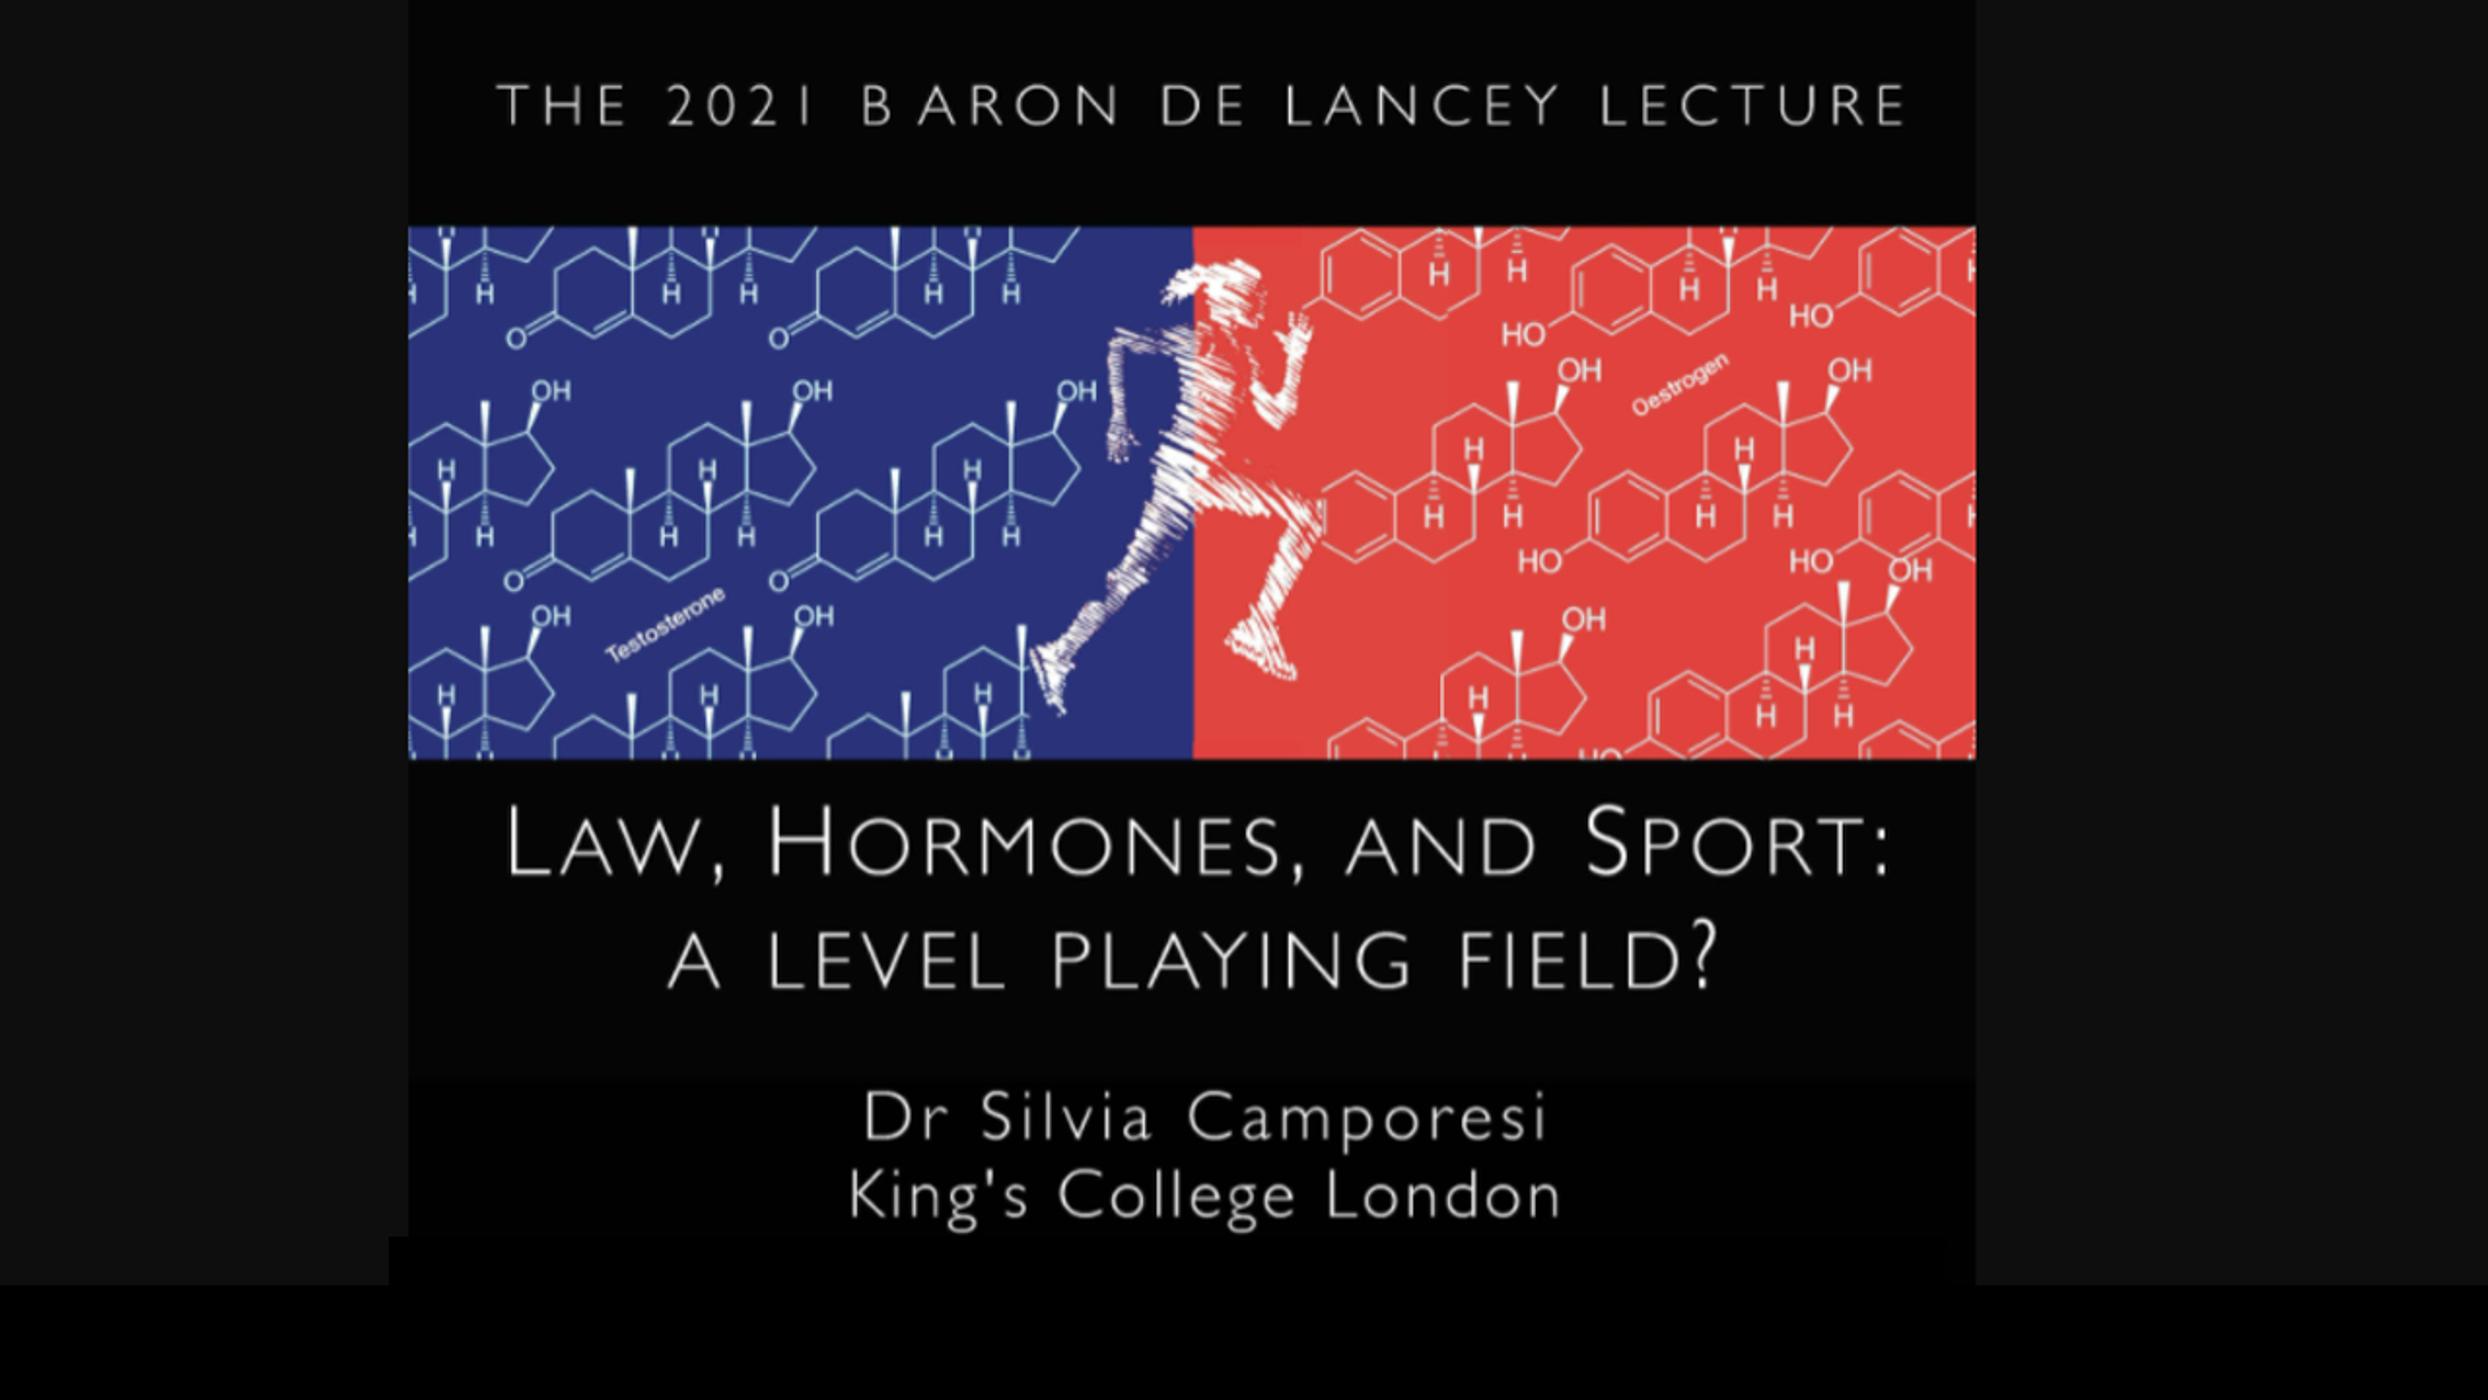 'Law, Hormones, and Sport: a level playing field?': The Baron Ver Heyden de Lancey Lecture 2021